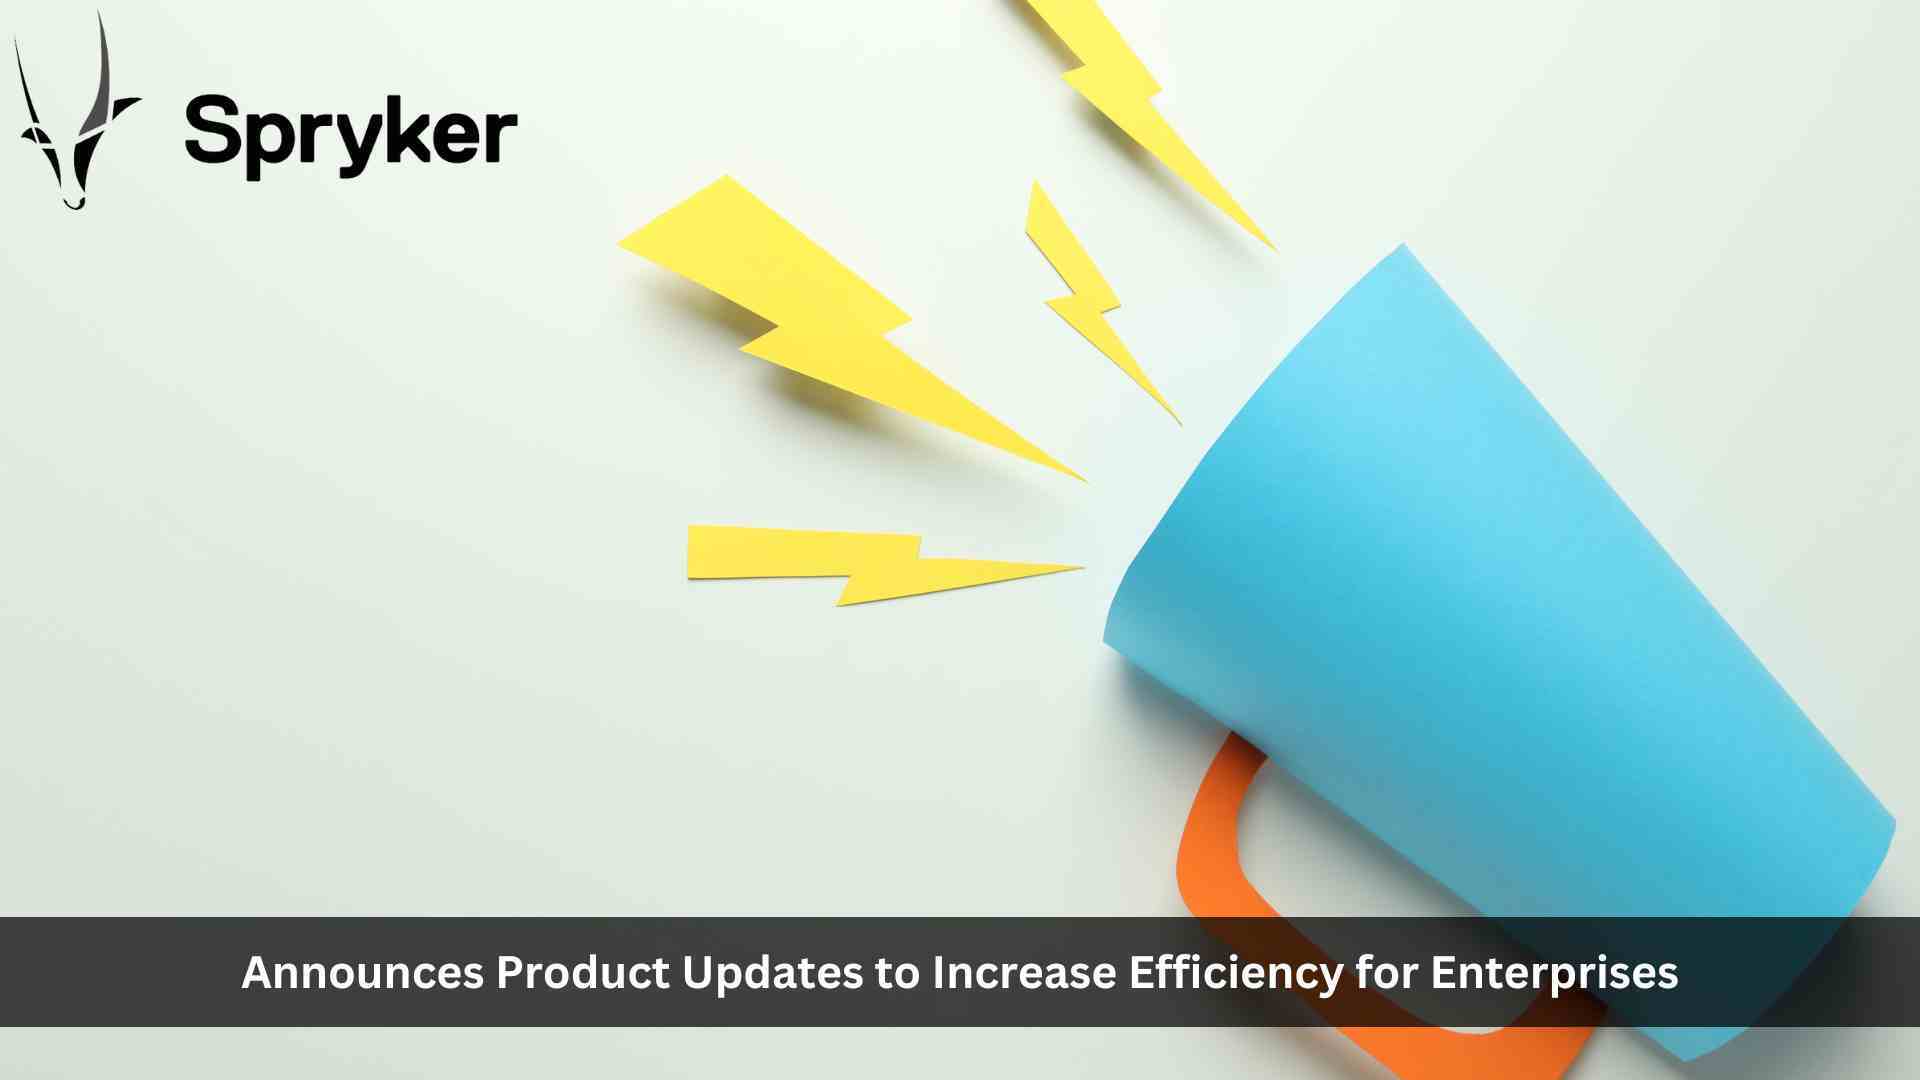 Spryker Announces Product Updates to Increase Efficiency for Enterprises